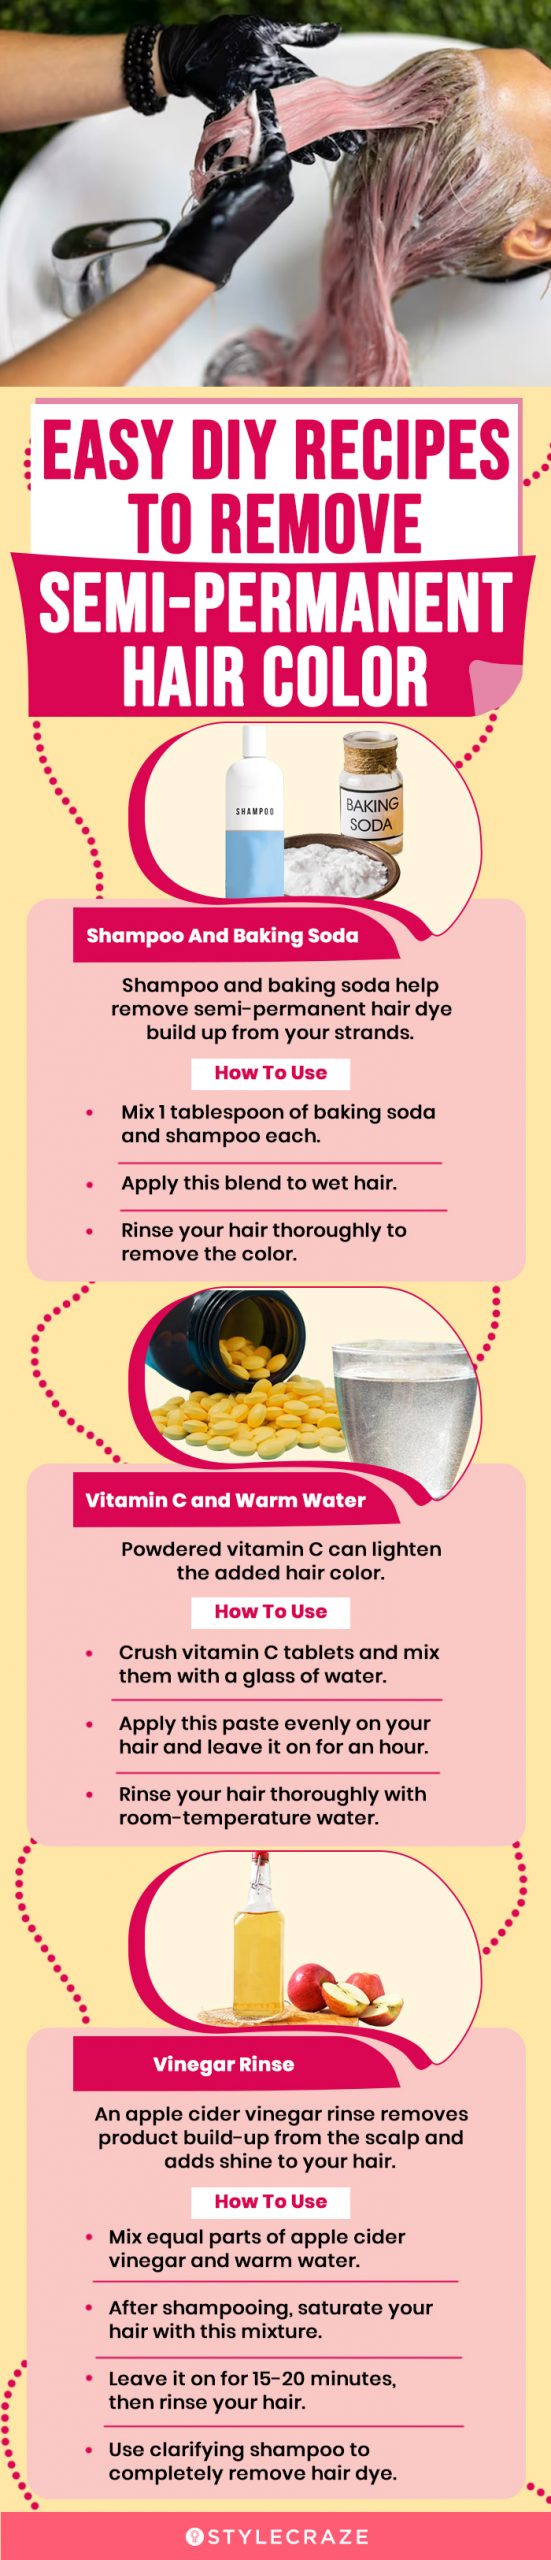 easy diy recipes to remove semi permanent hair color (infographic)